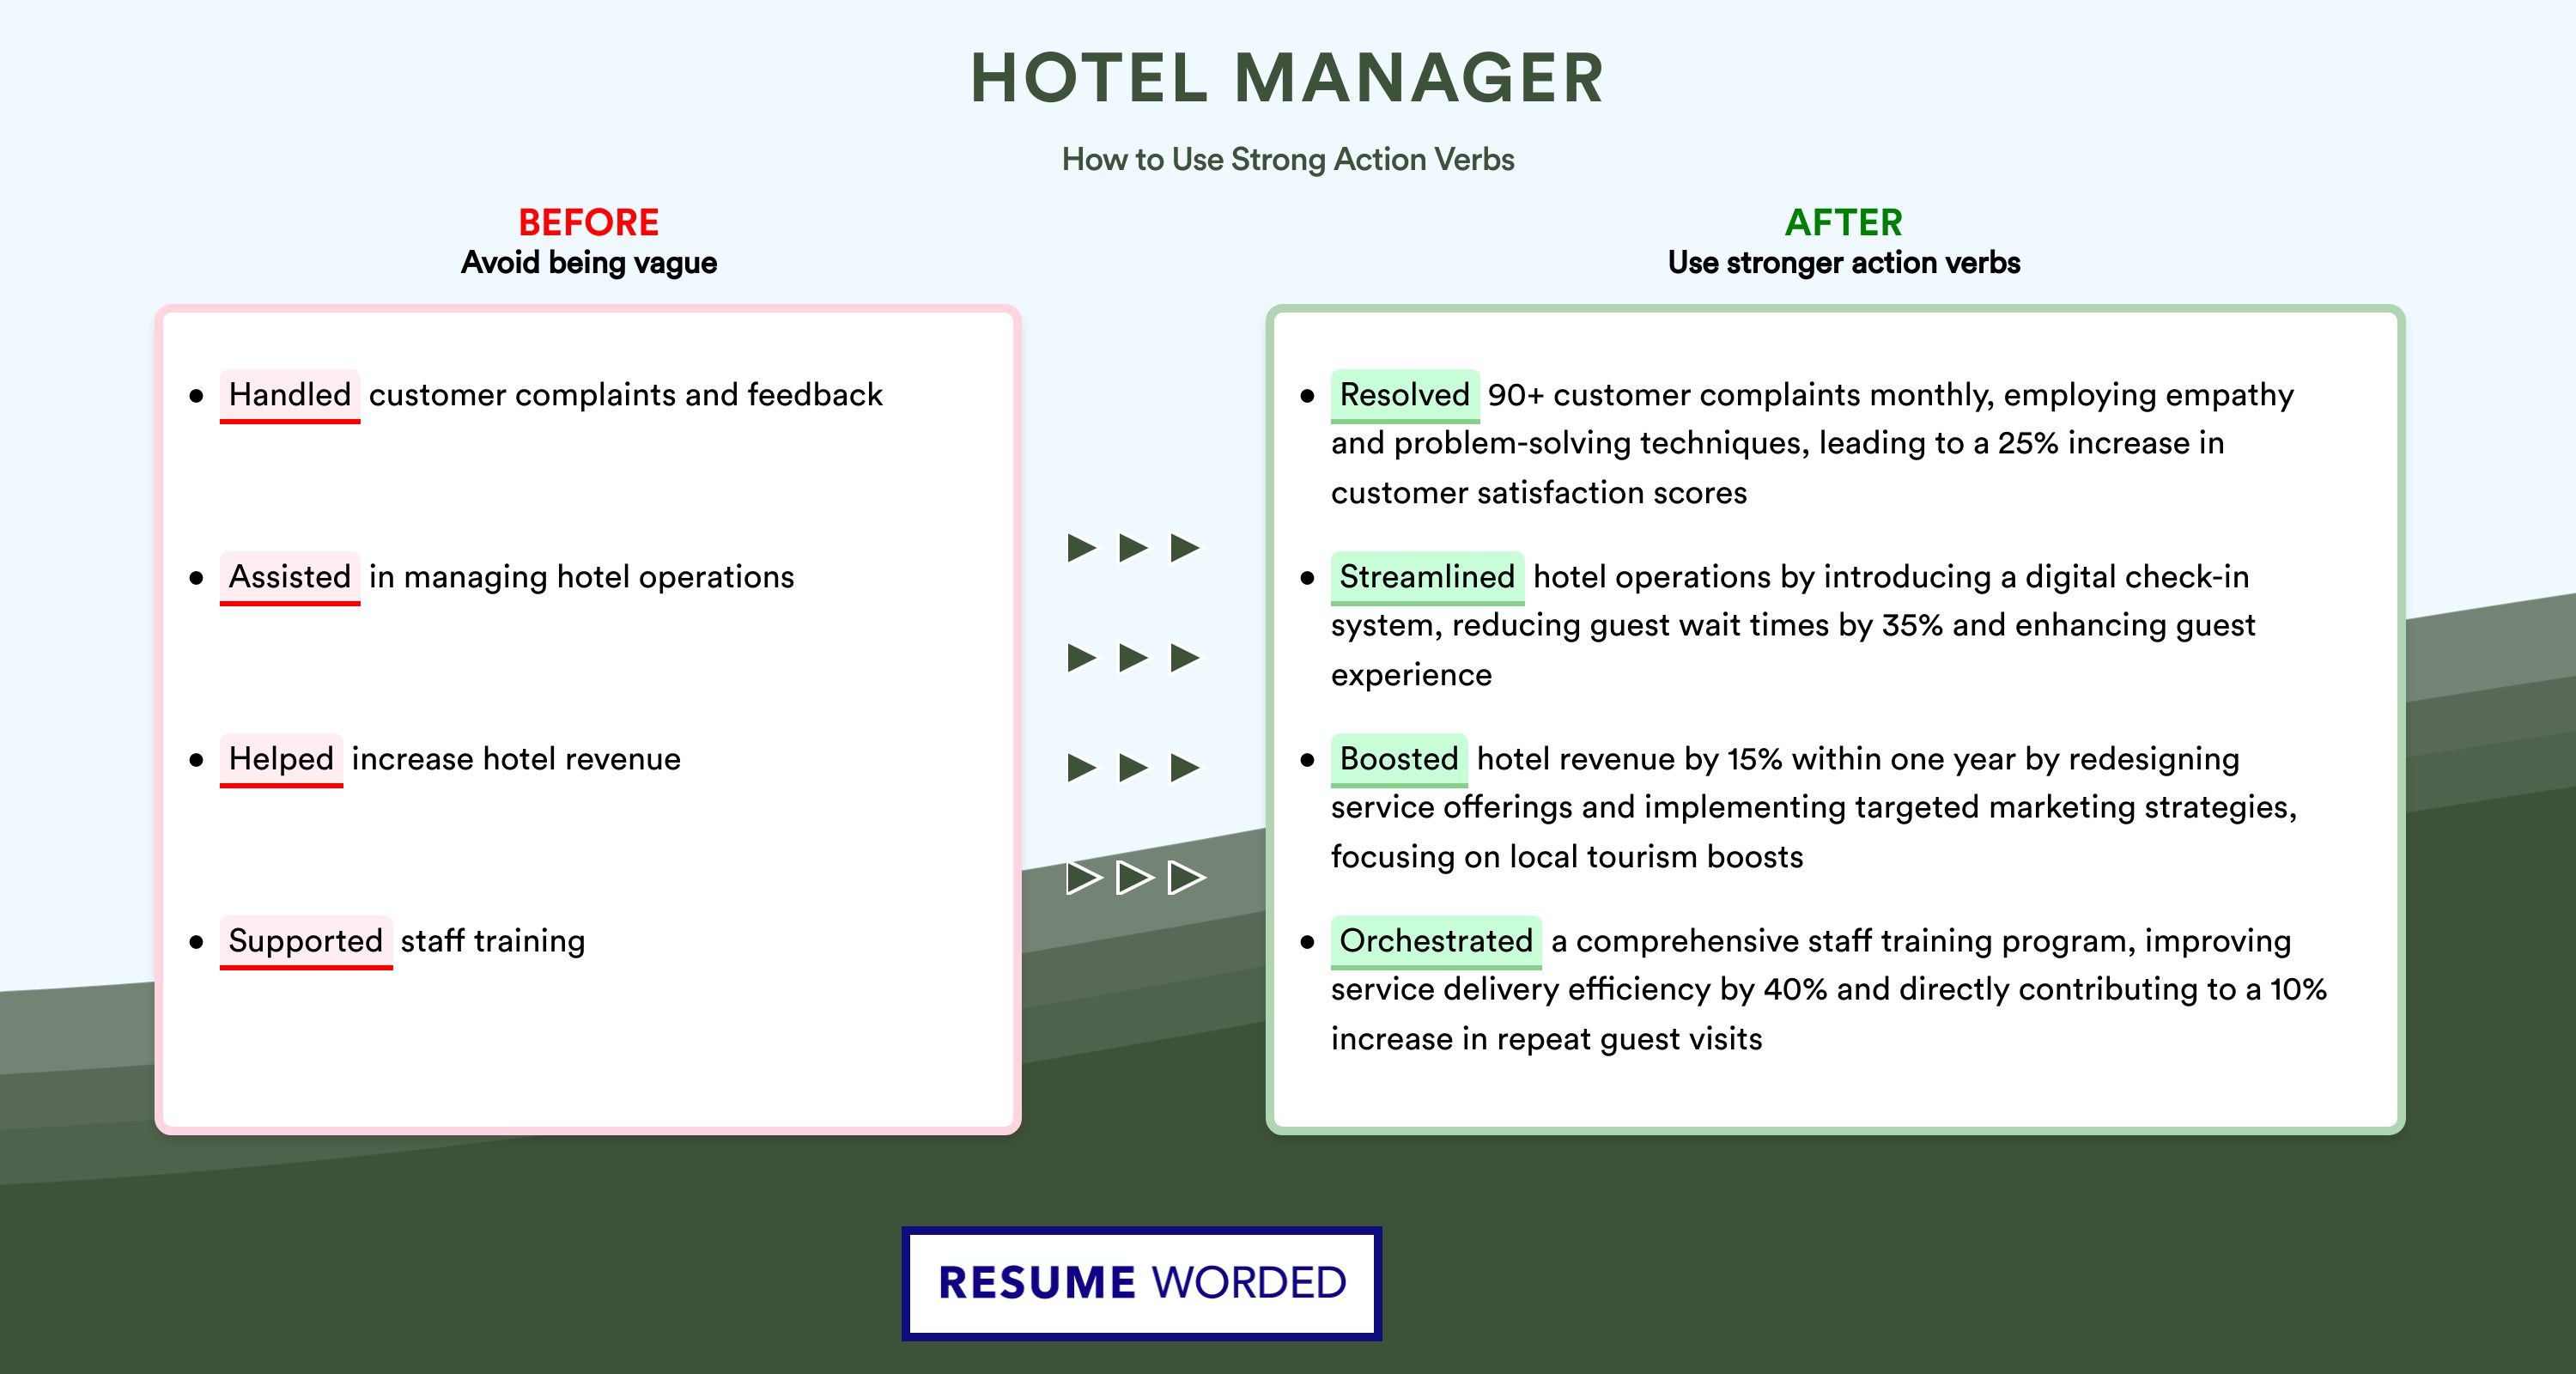 Action Verbs for Hotel Manager